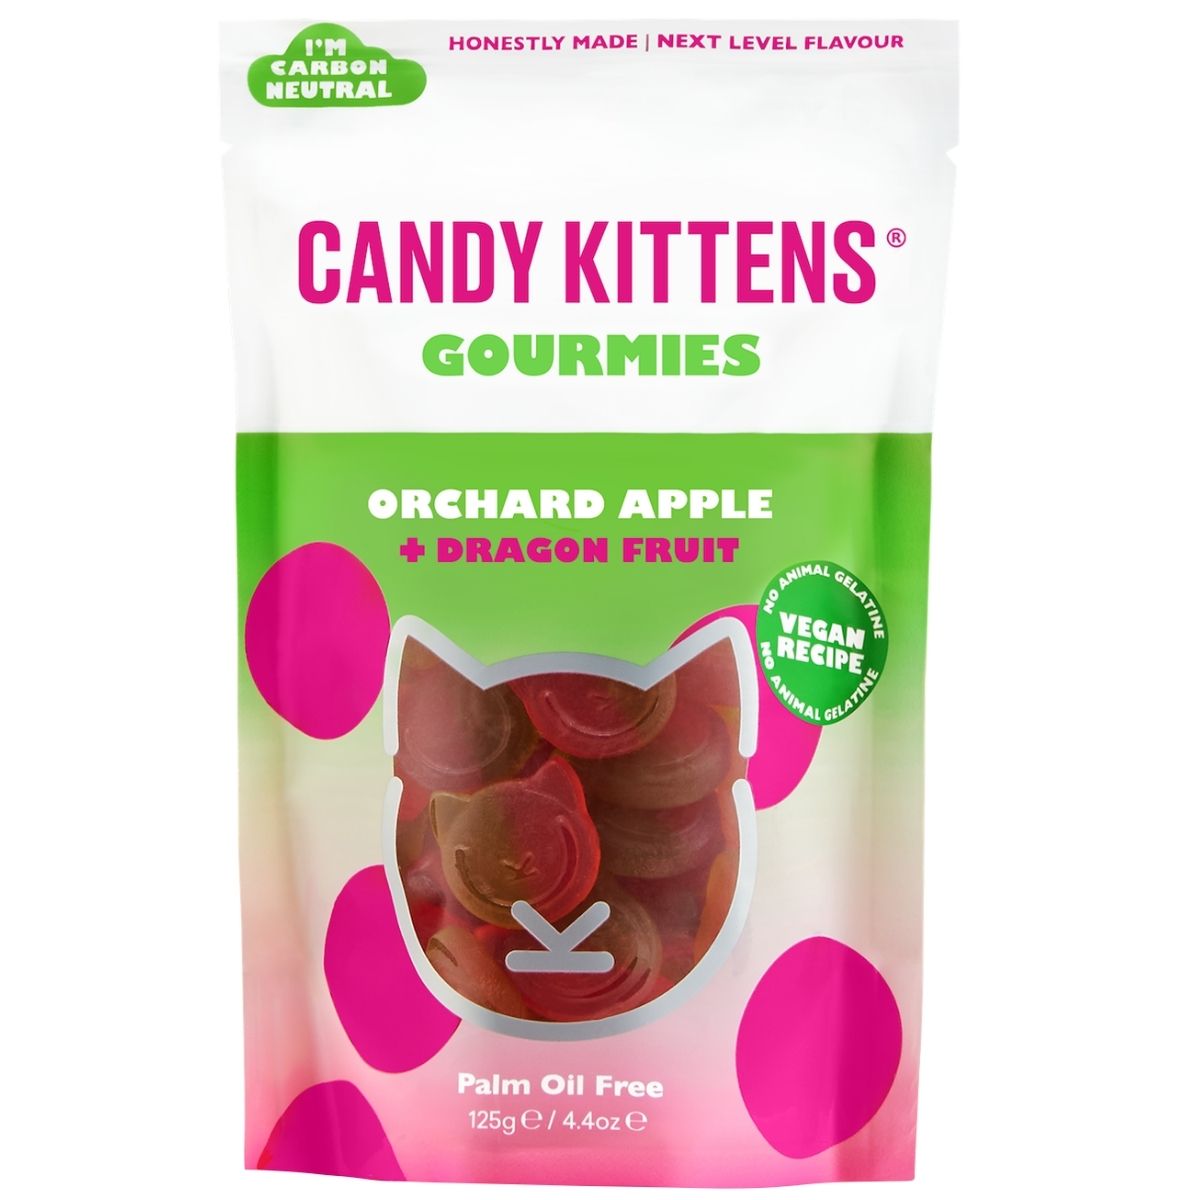 Candy Kittens Orchard Apple & Dragon Fruit Gourmet Sweets - 145g